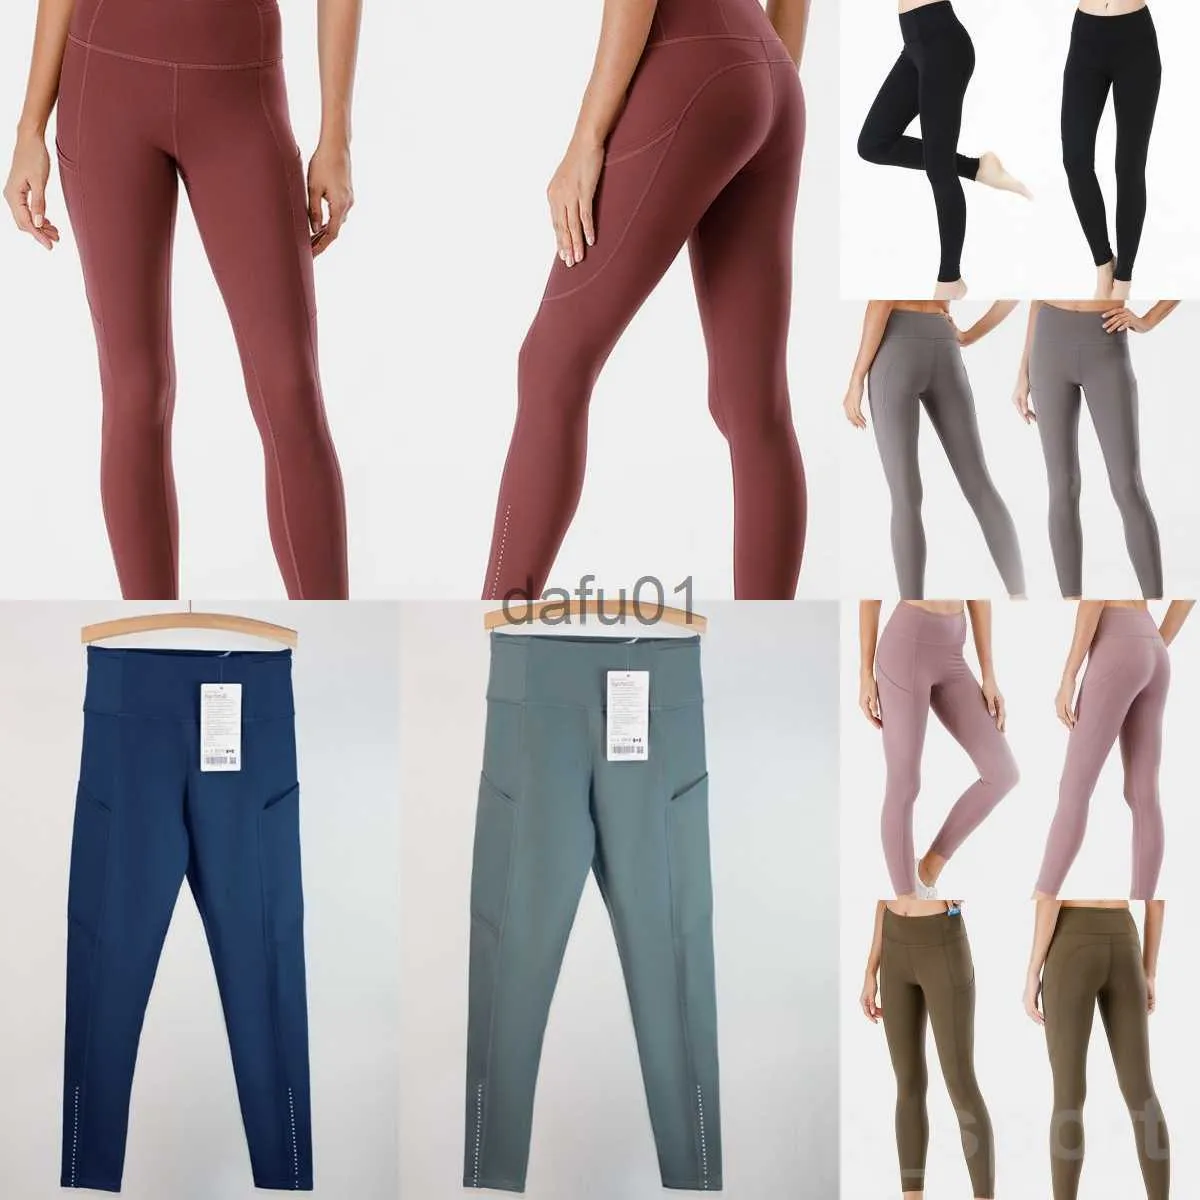 Lu Align Lu Womens Active Yoga Fitness Yoga Pants With Pockets With Pockets  Tight, Seamless, And Sexy From Dafu01, $6.23